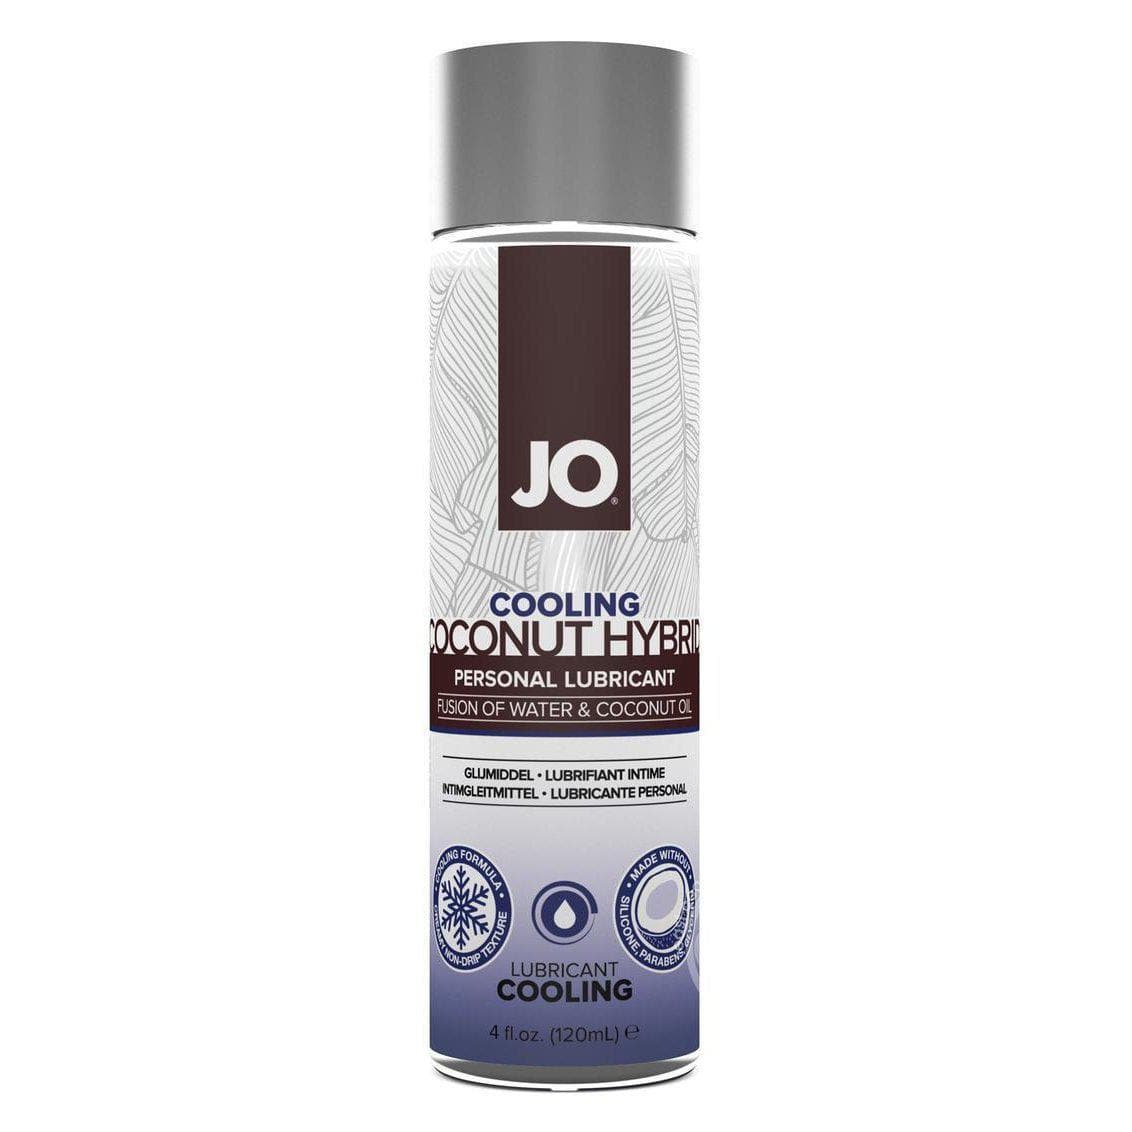 JO Silicone Free Hybrid Personal Cooling Original Lubricant Water And Coconut Oil - Romantic Blessings